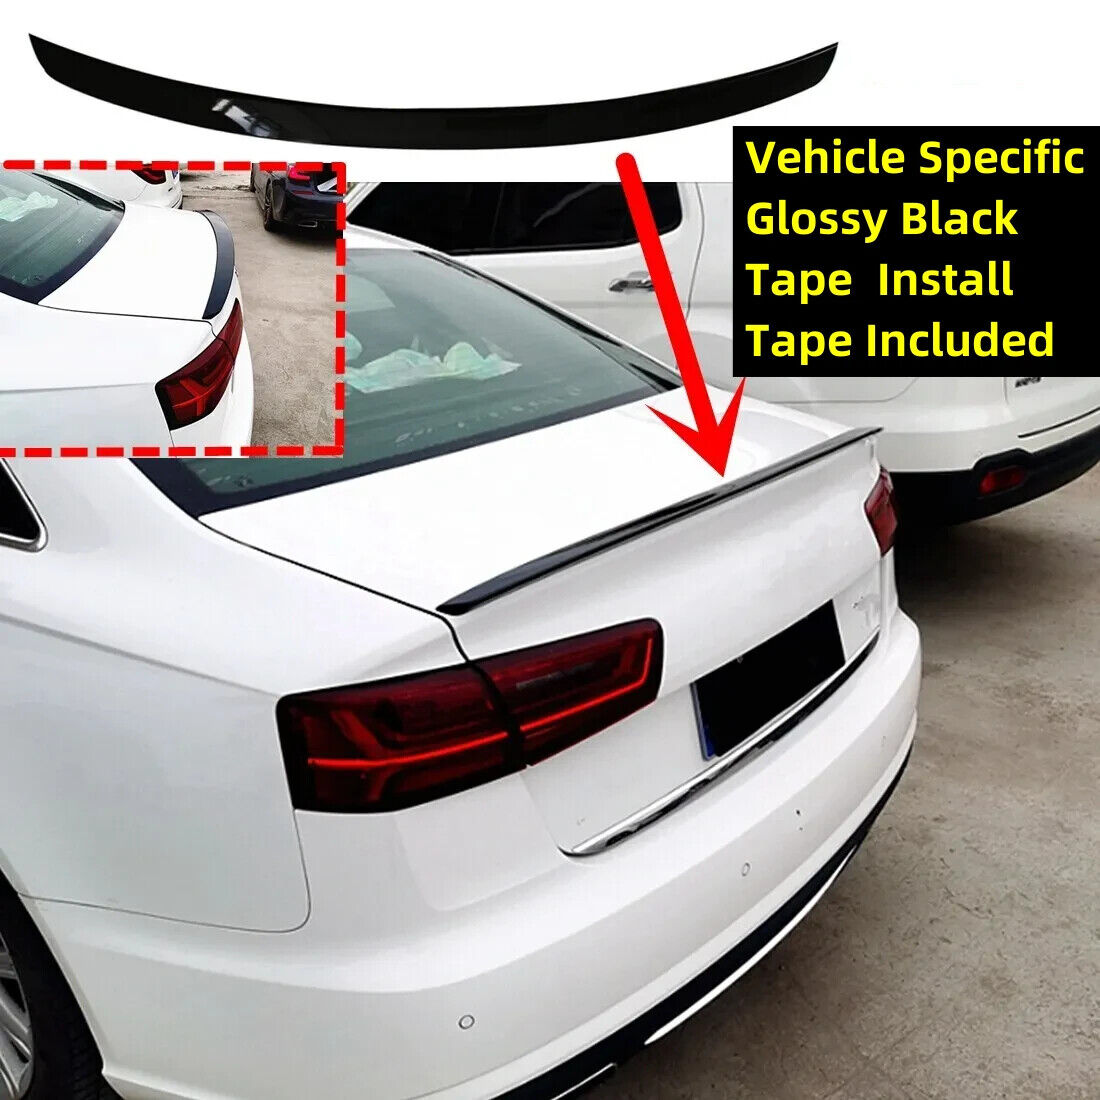 S6 Style Glossy Black Trunk Spoiler Wing Fits AUDI A6 / A6 Quattro C7 S6 2012-18